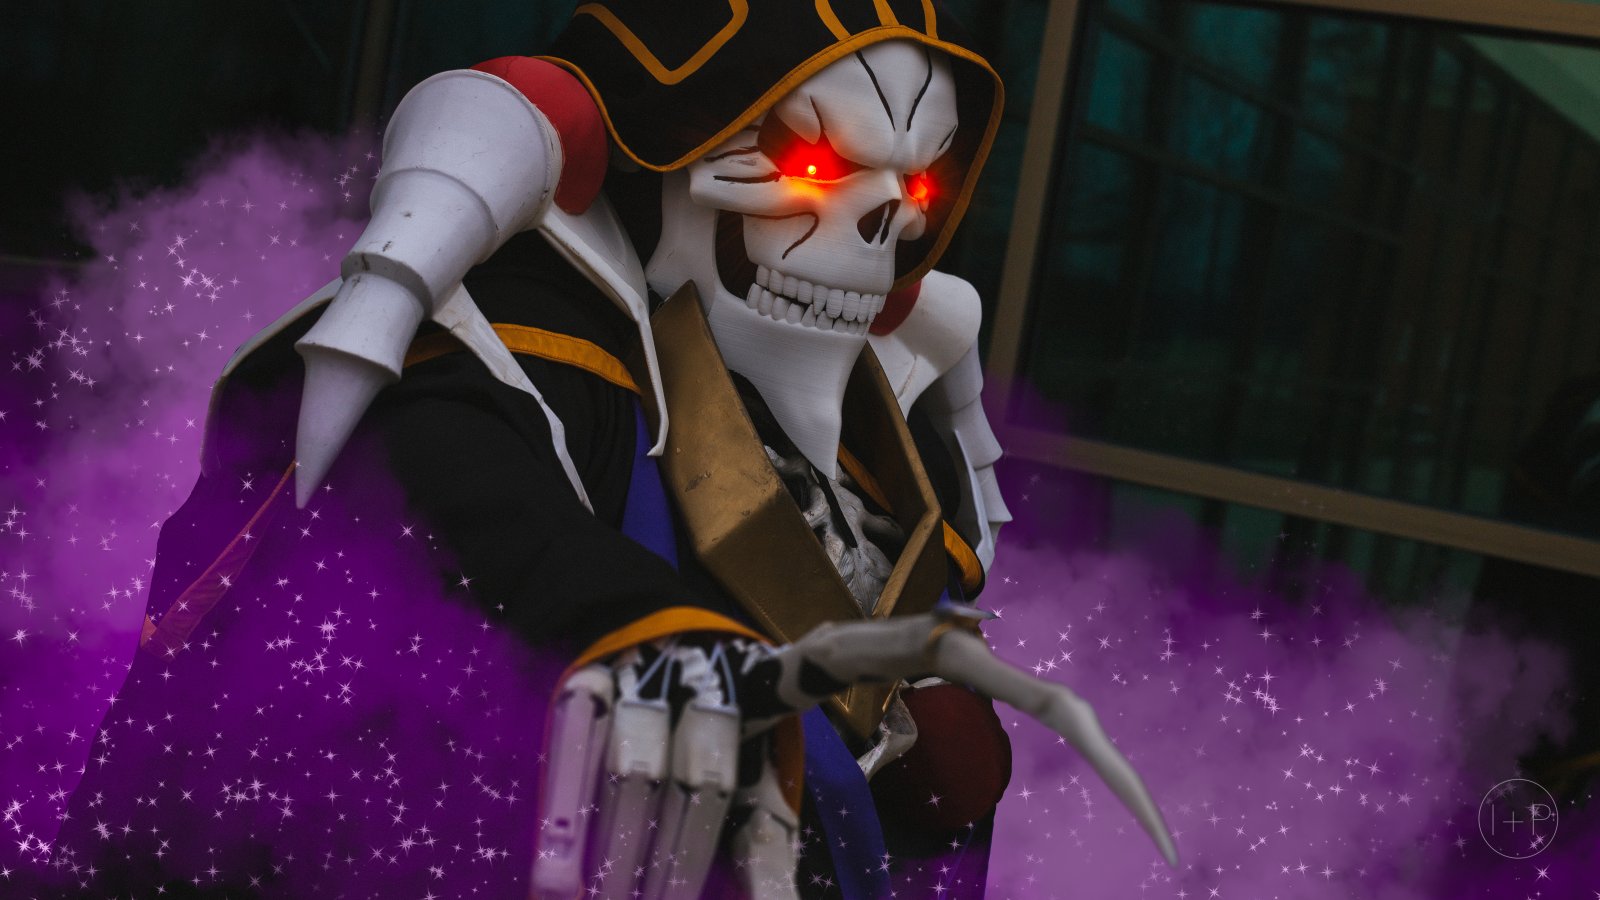 Ainz Ooal Gown Cosplay - by Naota